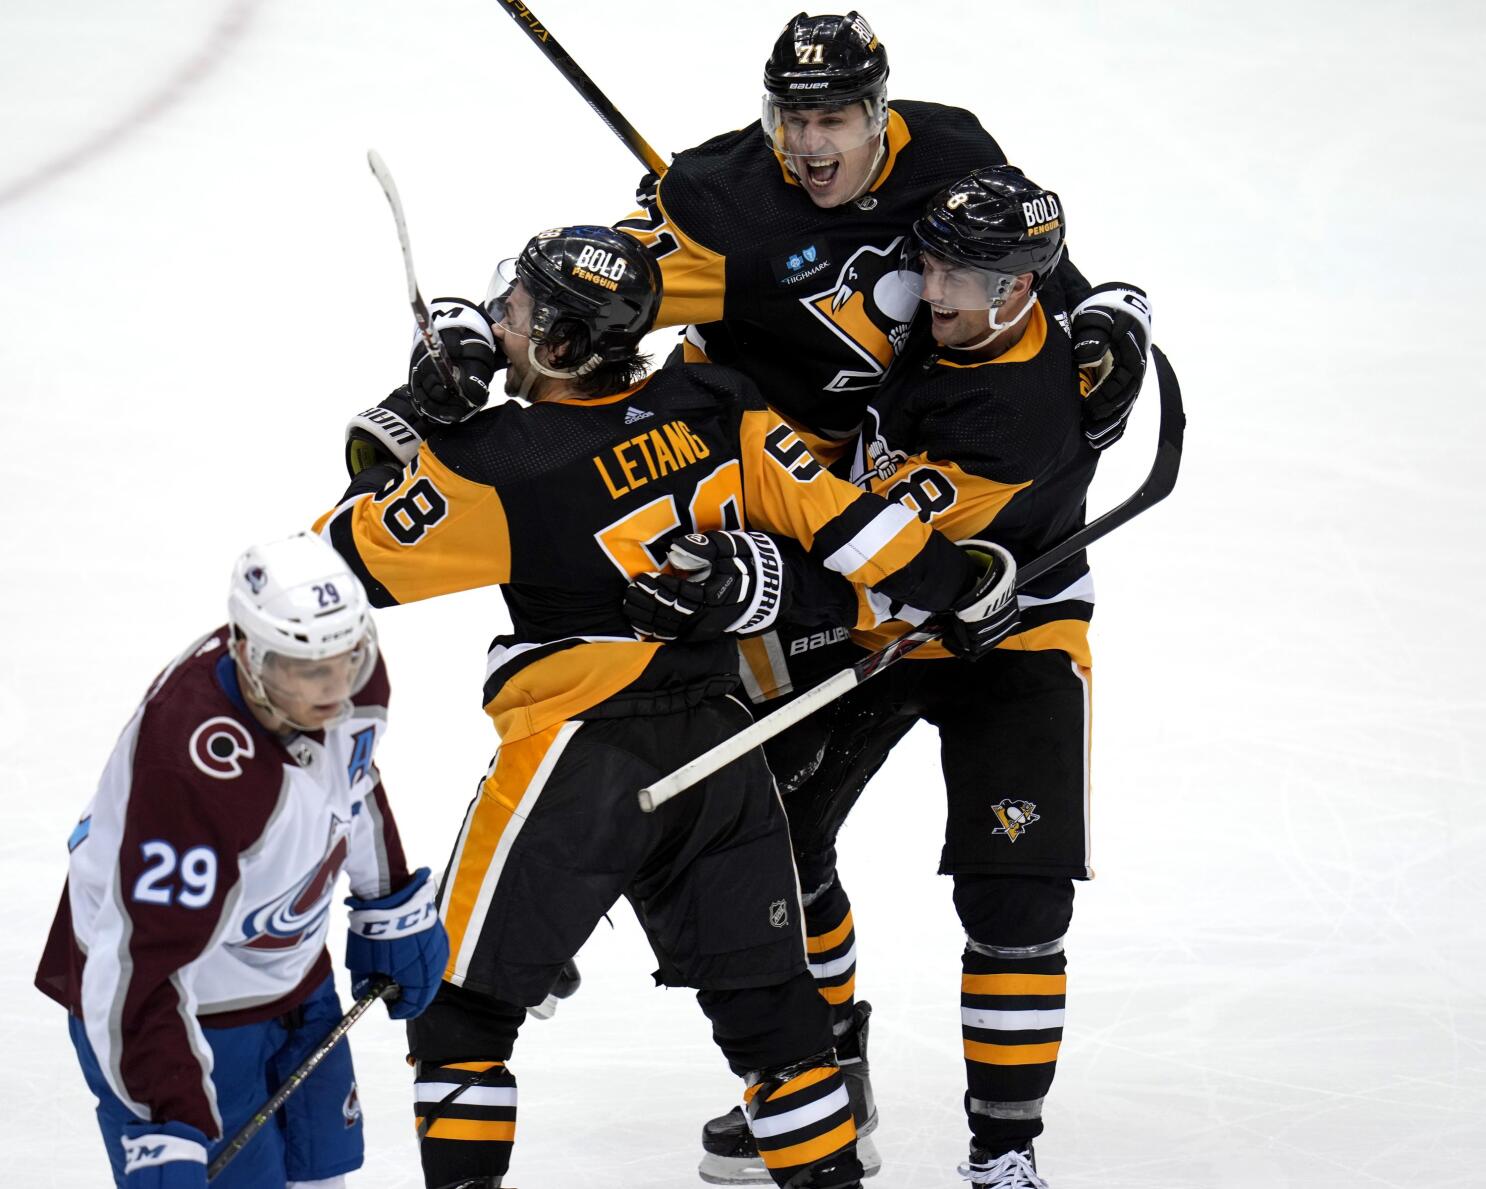 Letang scores in OT to lift Pens past Rangers, 3-2, Sports